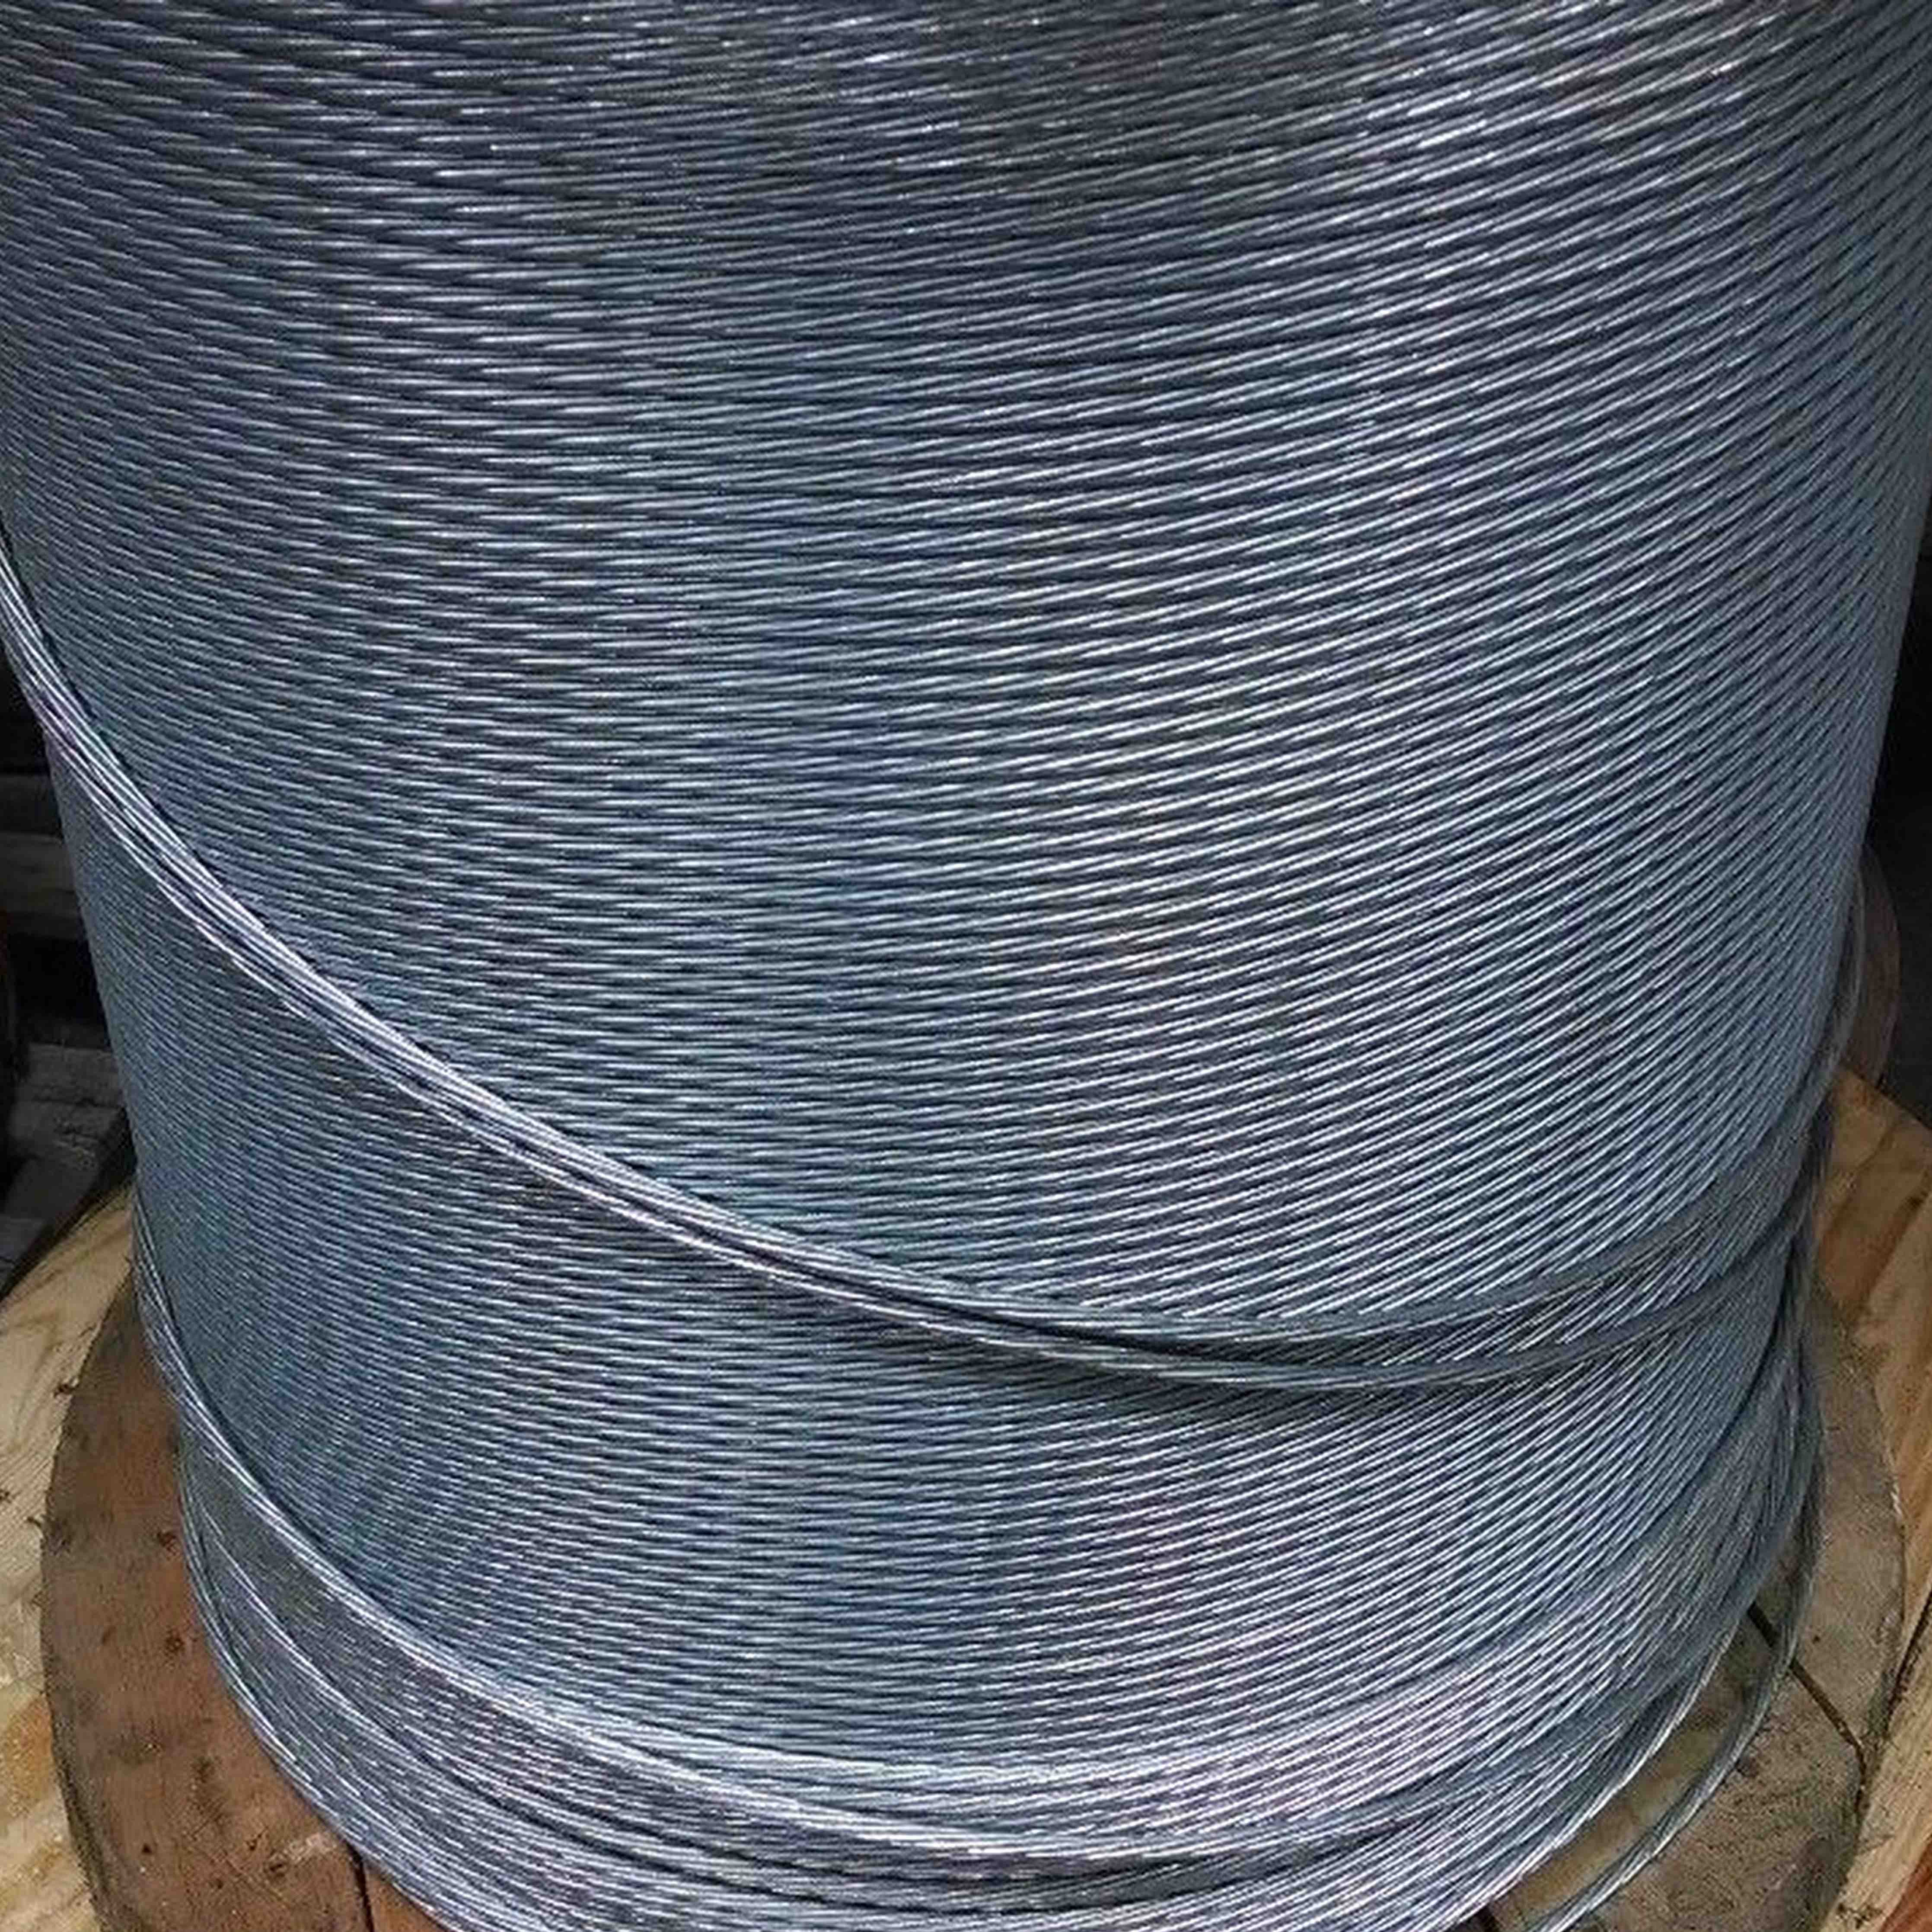 1x7 EHS Galvanized Strand / Guy Wire - Groove Industrial